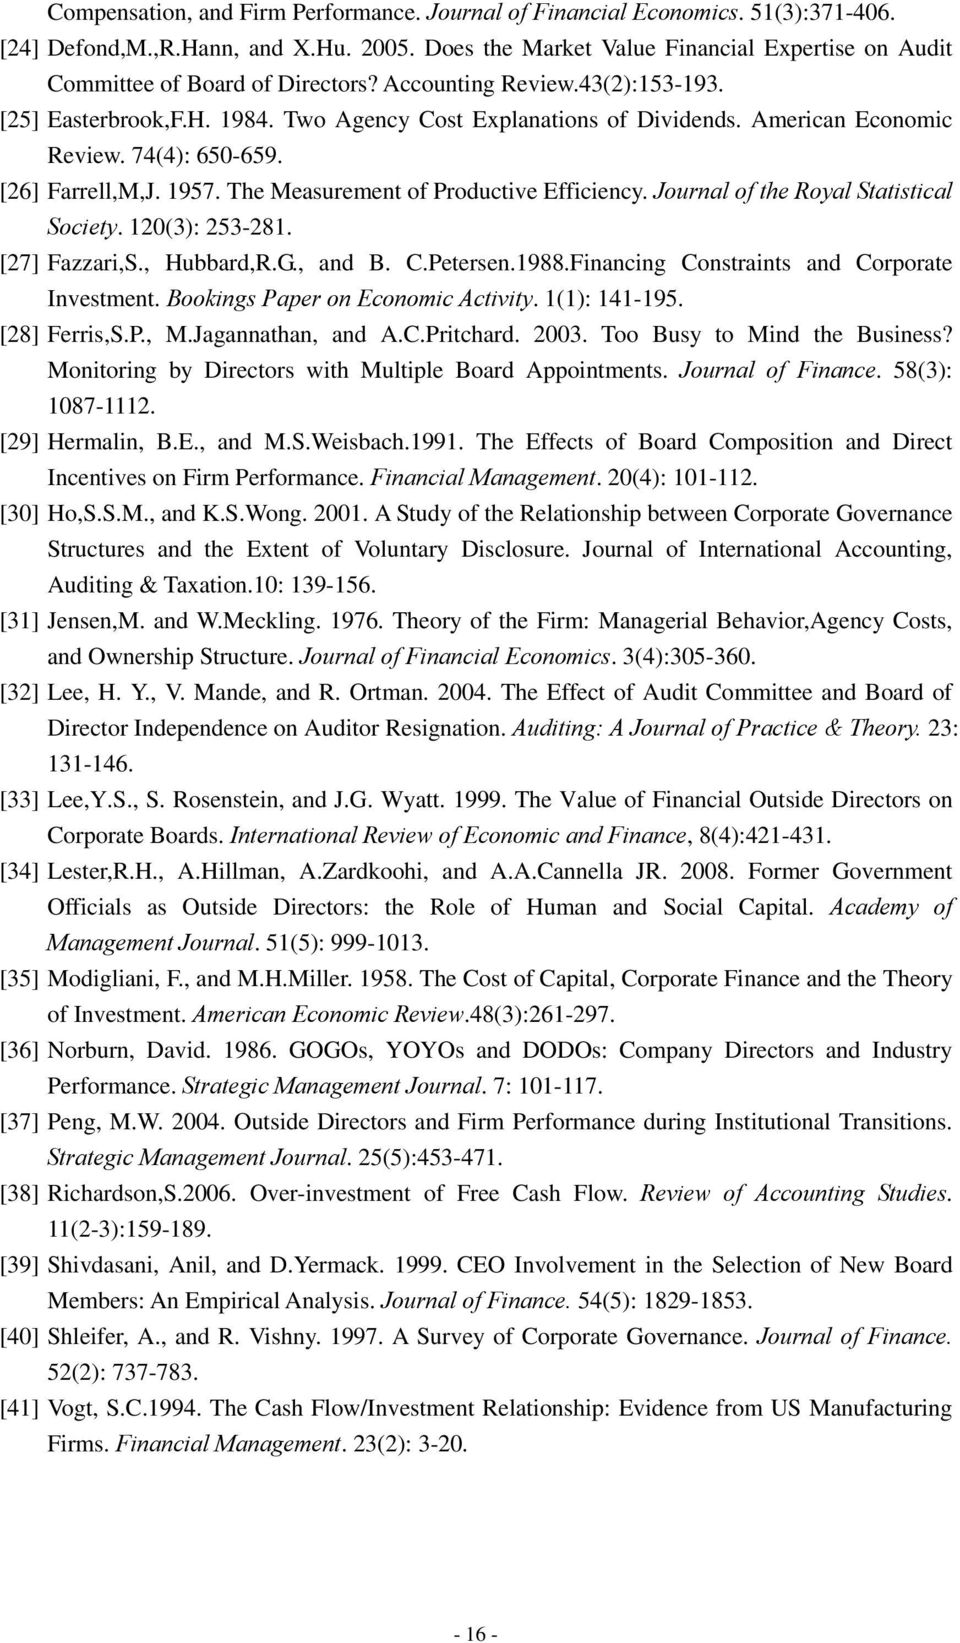 Journal of the Royal Statstcal Socety. 120(3): 253-281. [27] Fazzar,S., Hubbard,R.G., and B. C.Petersen.1988.Fnancng Constrants and Corporate Investment. Bookngs Paper on Economc Actvty.